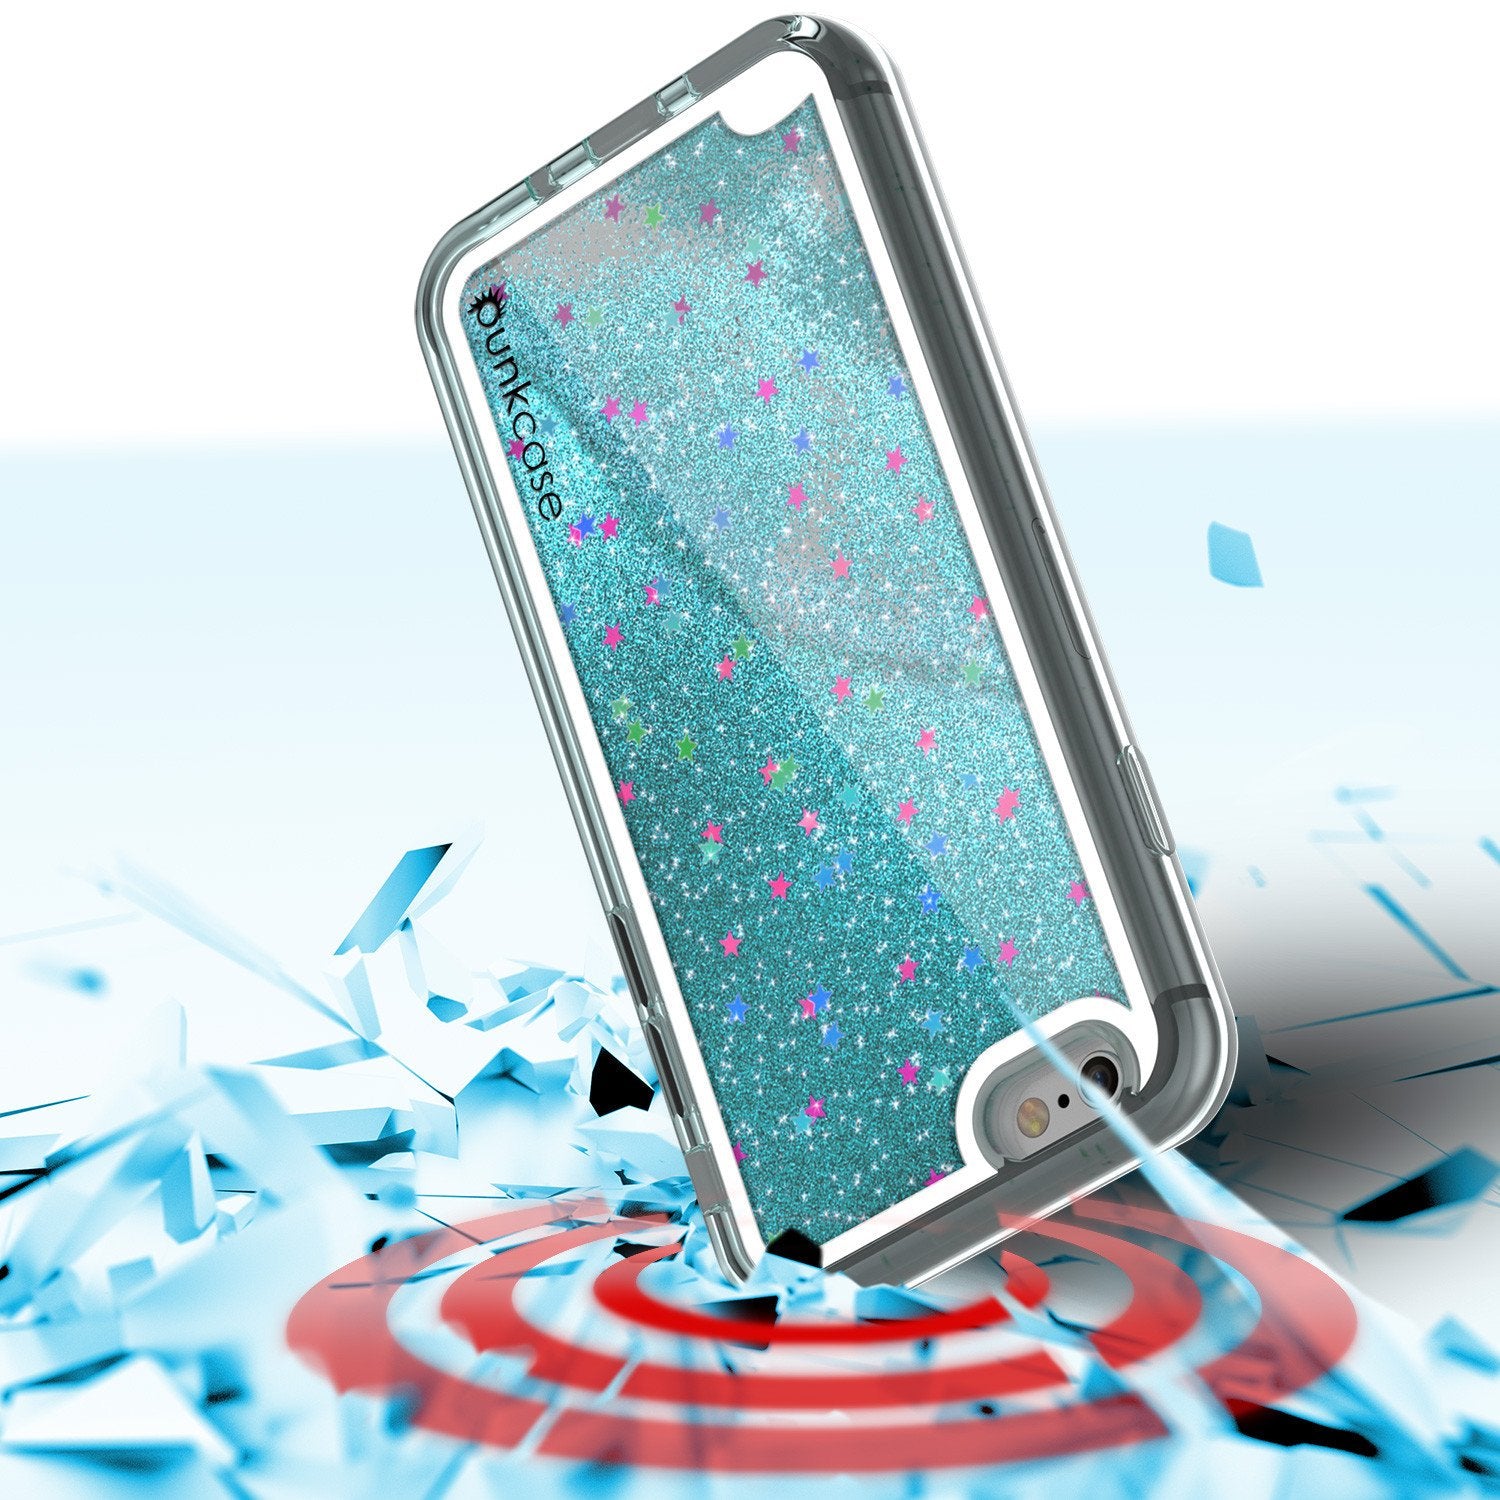 iPhone 7 Case, Punkcase [Liquid Teal Series] Protective Dual Layer Floating Glitter Cover with lots of Bling & Sparkle + 0.3mm Tempered Glass Screen Protector for Apple iPhone 7s